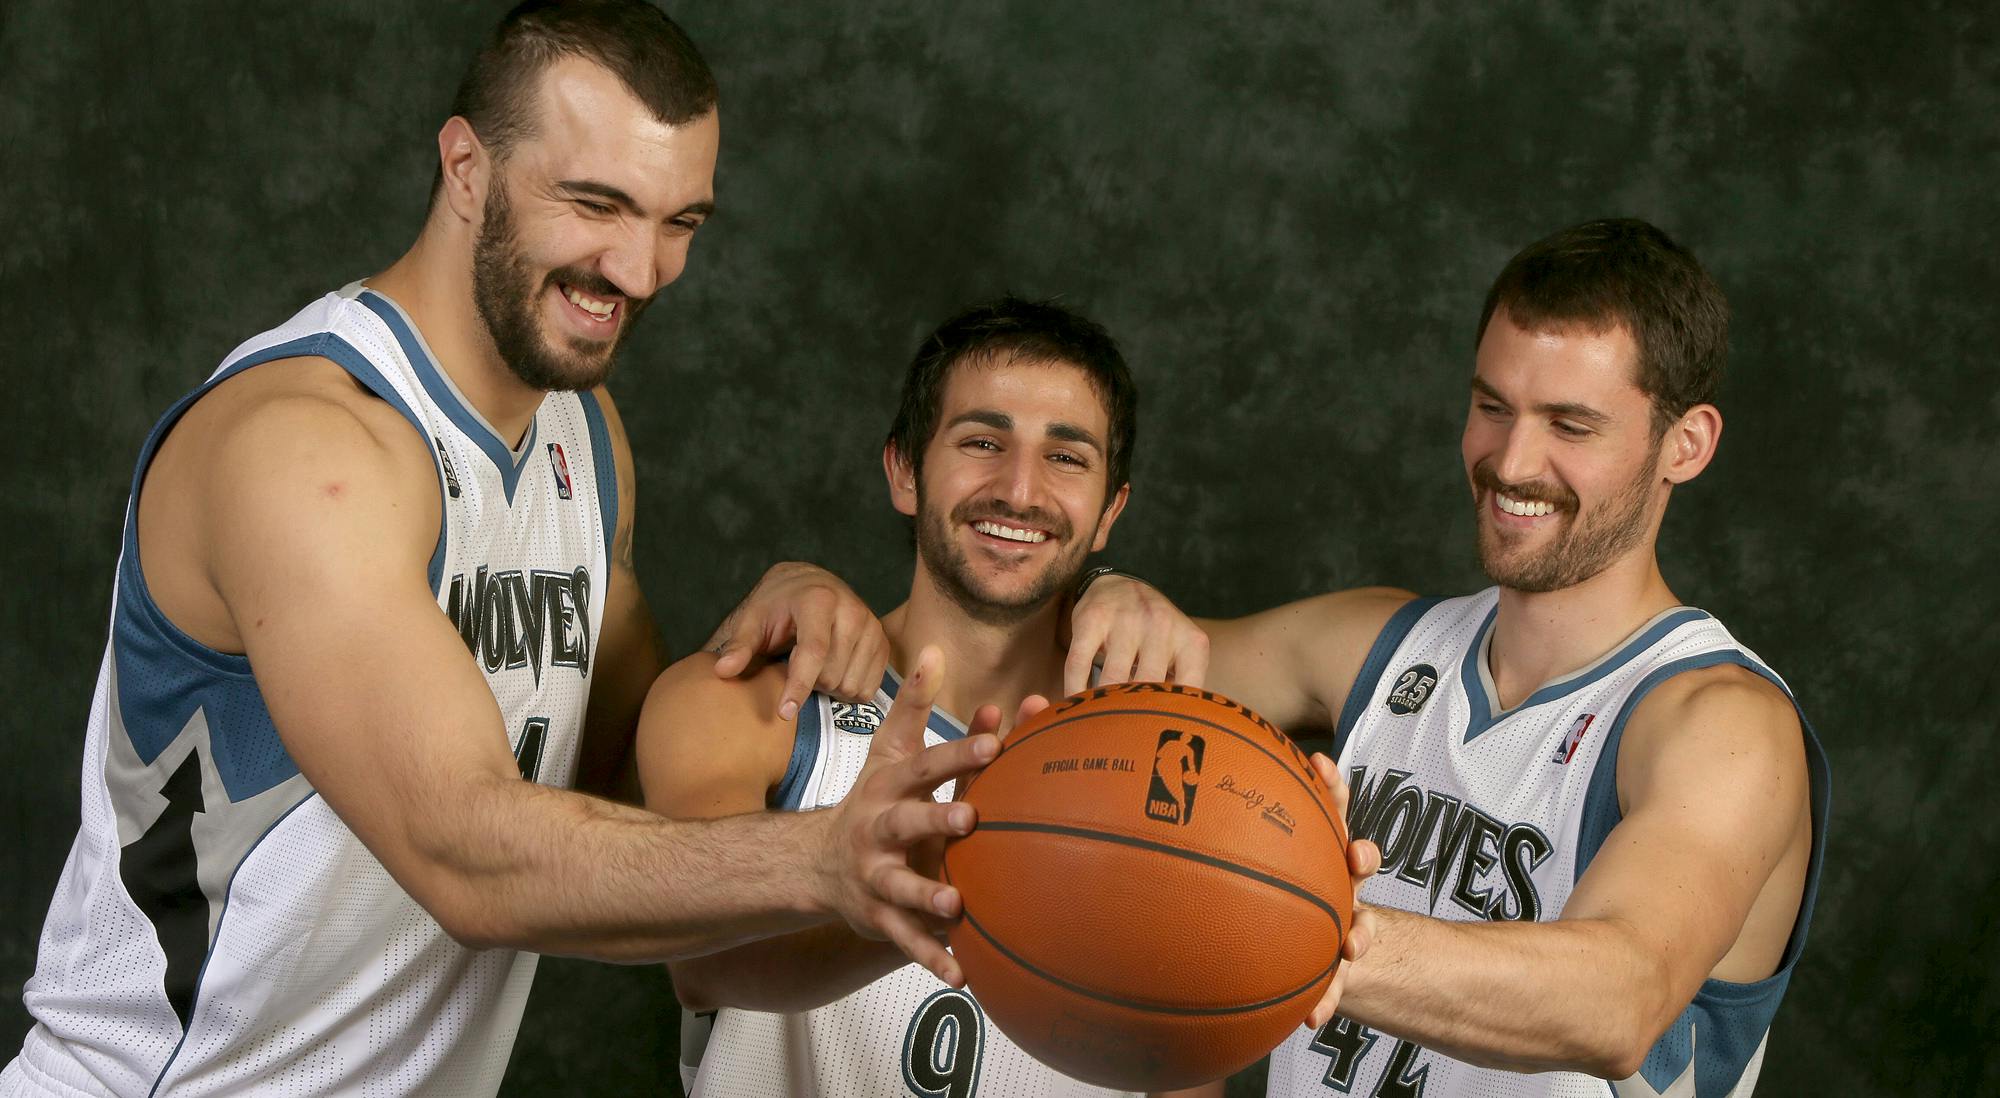 Rubio, Nikola Pekovic (left) and Kevin Love (right) were the key members of the 2013-14 Timberwolves. That squad had playoff aspirations but finished 40-42 – easily the most victories in any season of the Rubio era, but still short of the playoffs. Love was traded after the season for Andrew Wiggins as the Wolves began another rebuilding project.